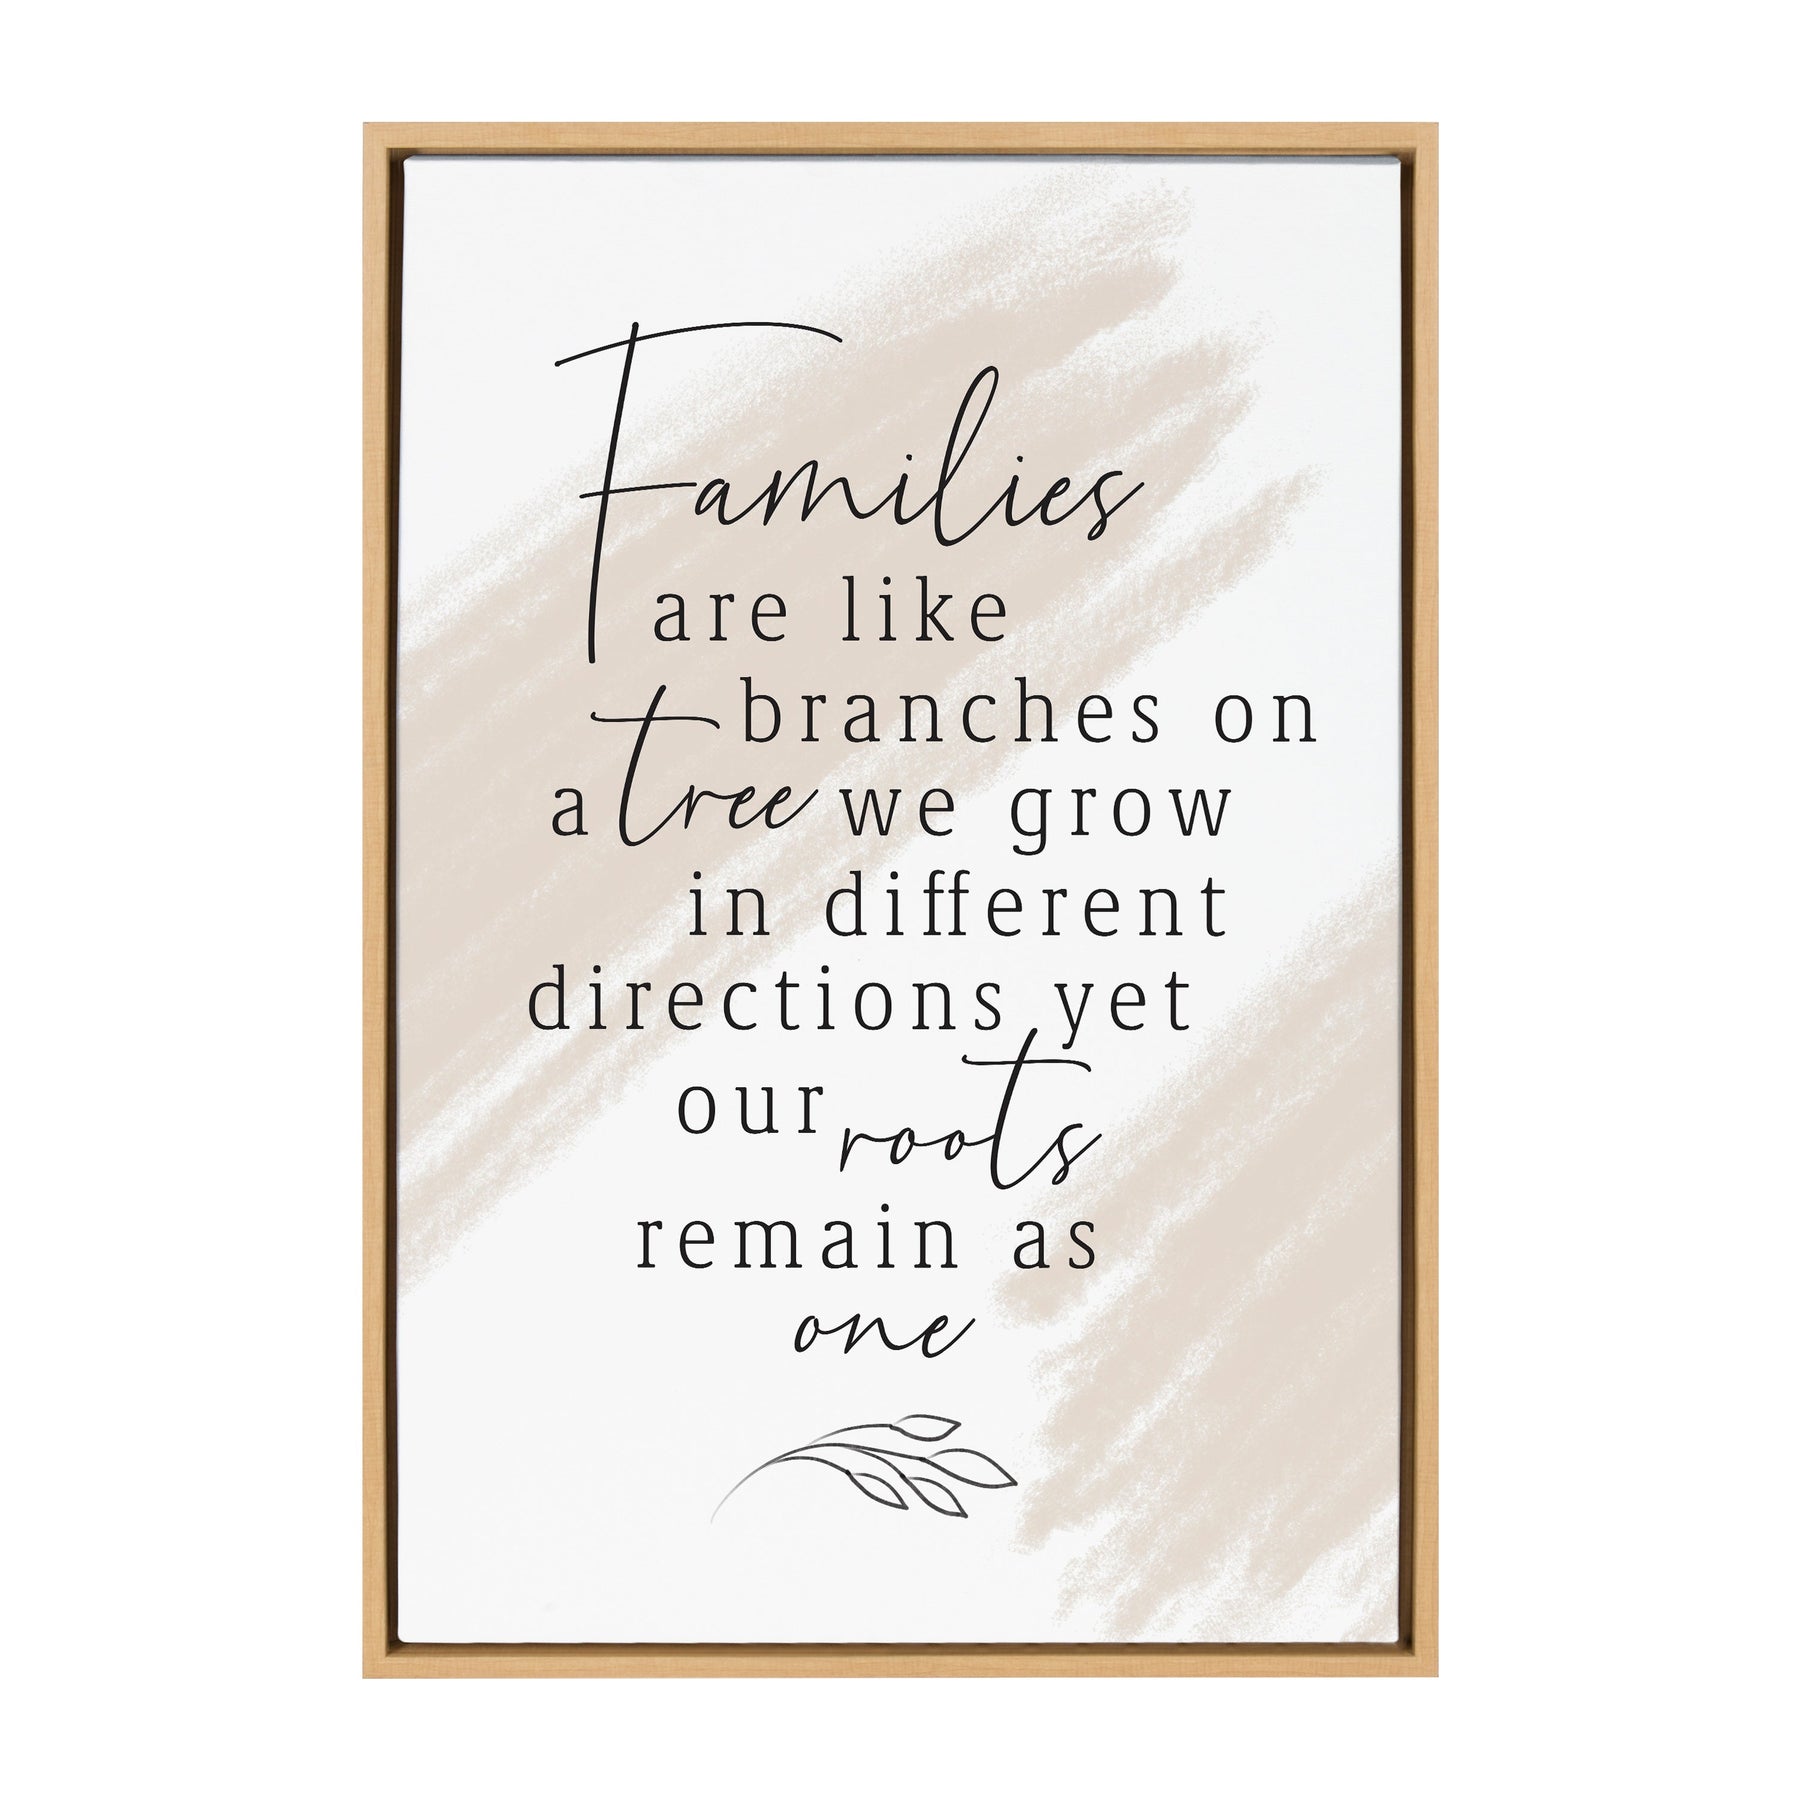 Families are like branches on a tree - we grow in different directions yet our roots remains as one / 23x33 Framed Canvas